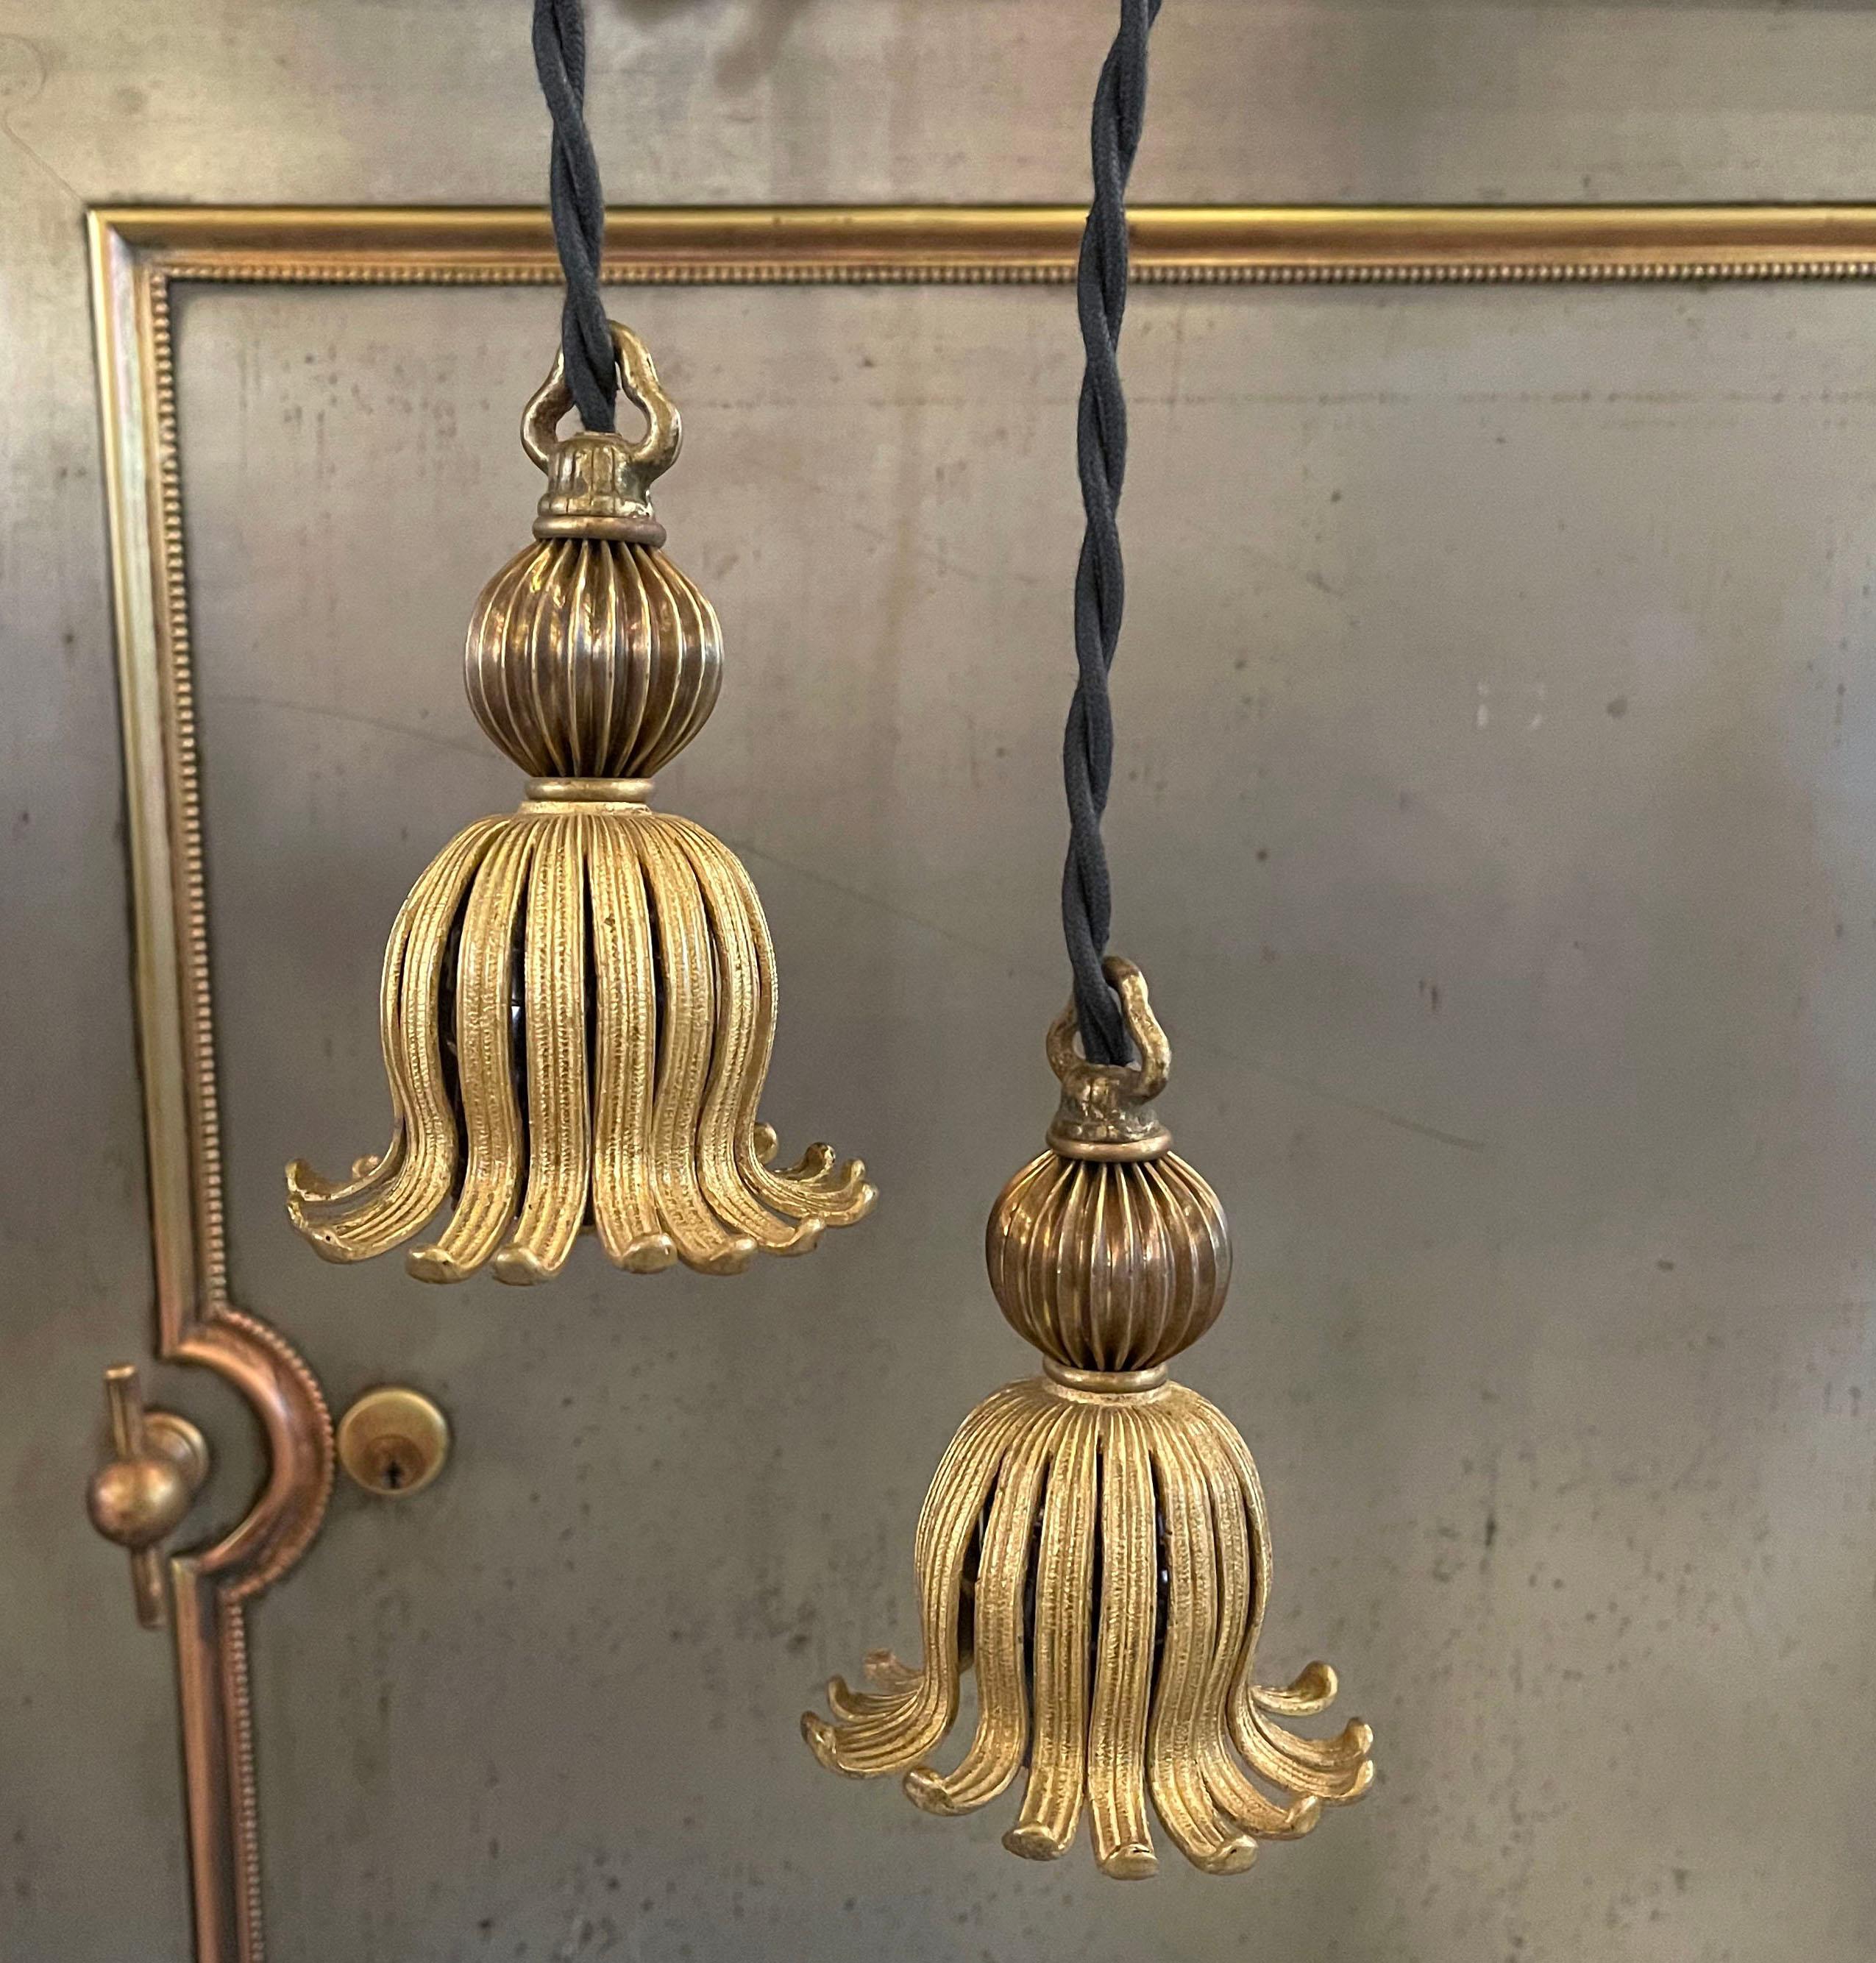 Pair of petite and whimsical, Hollywood Regency, brass tassle, fitter pendants are newly wired with braided cloth cord and ready to receive the decorative bulbs of your choice. Their overall height is 60.5 inches.